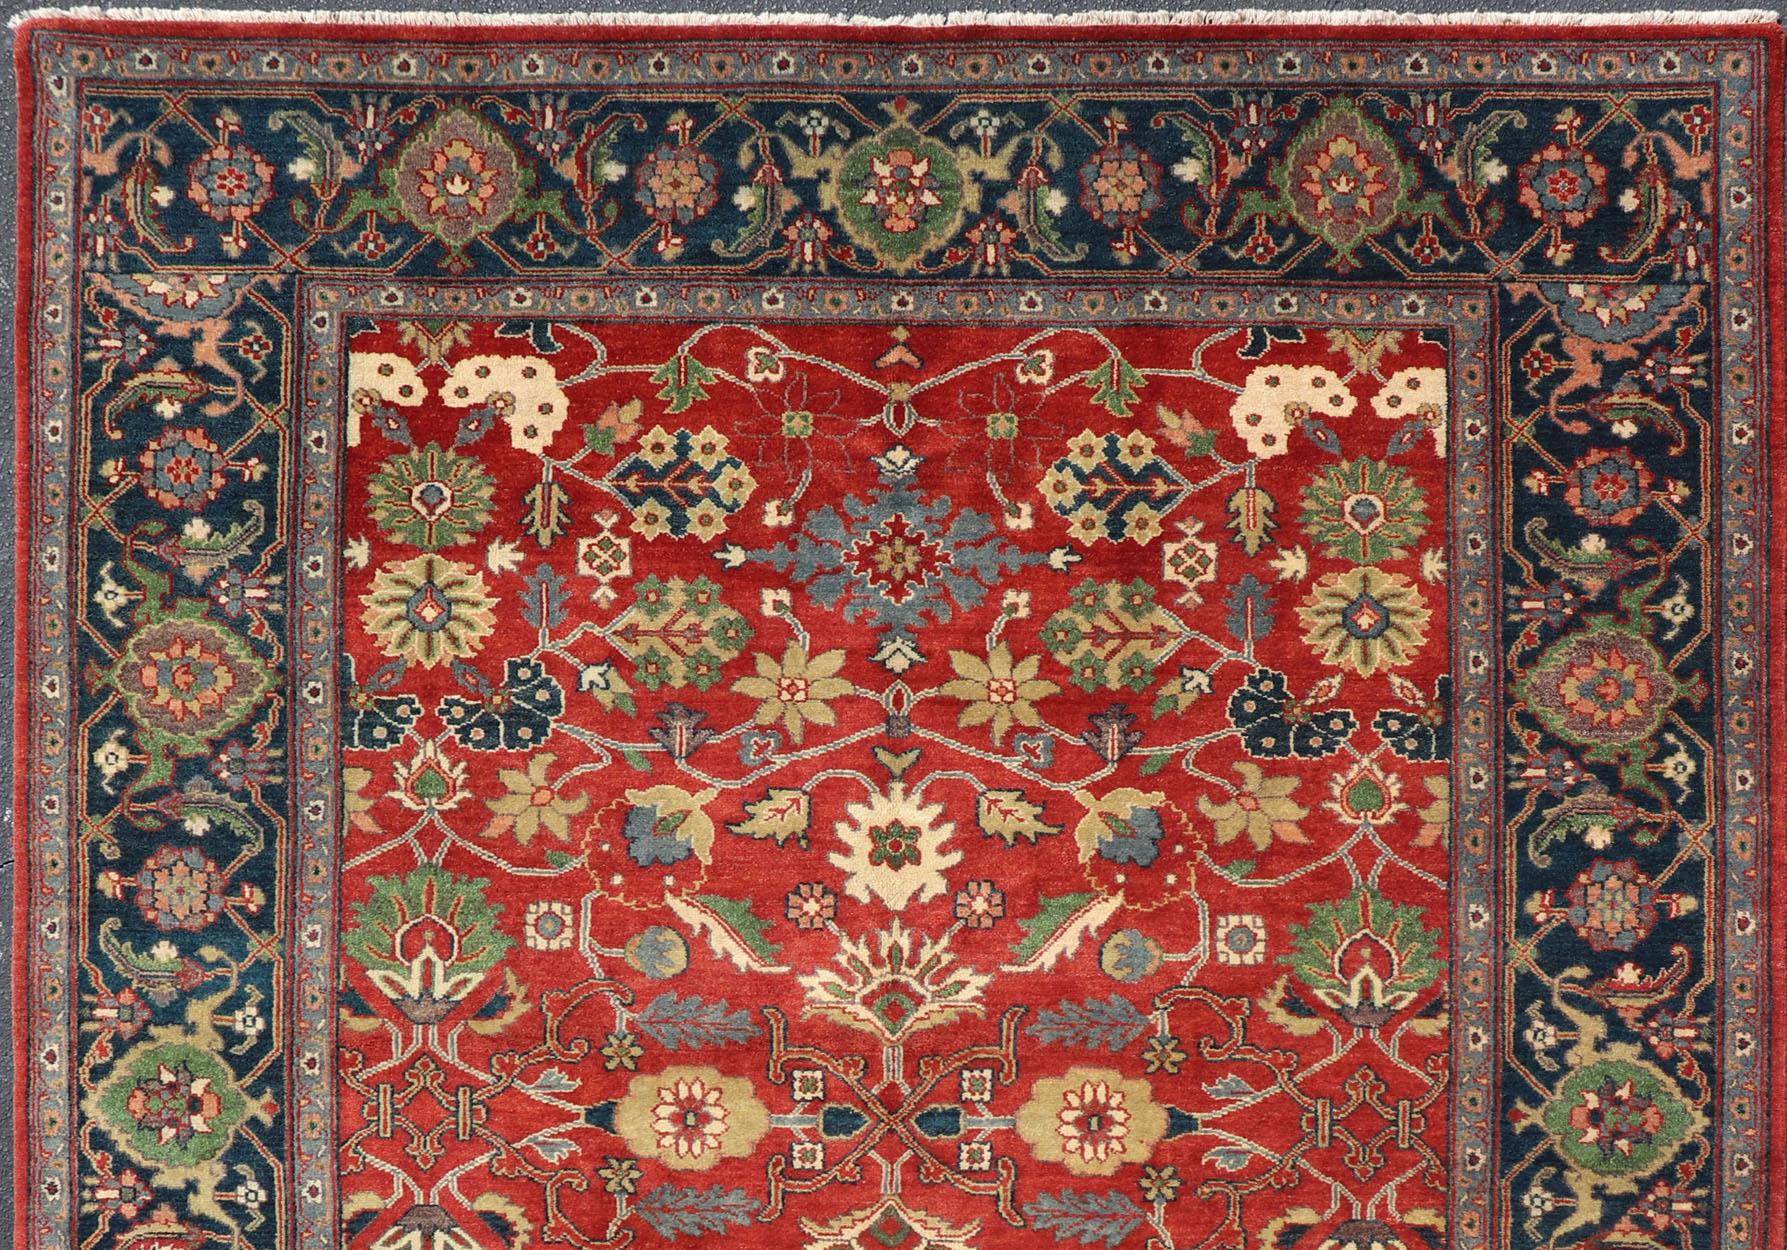 Reproduction Sultanabad-Mahal All-over Floral Hand-Knotted Carpet  7